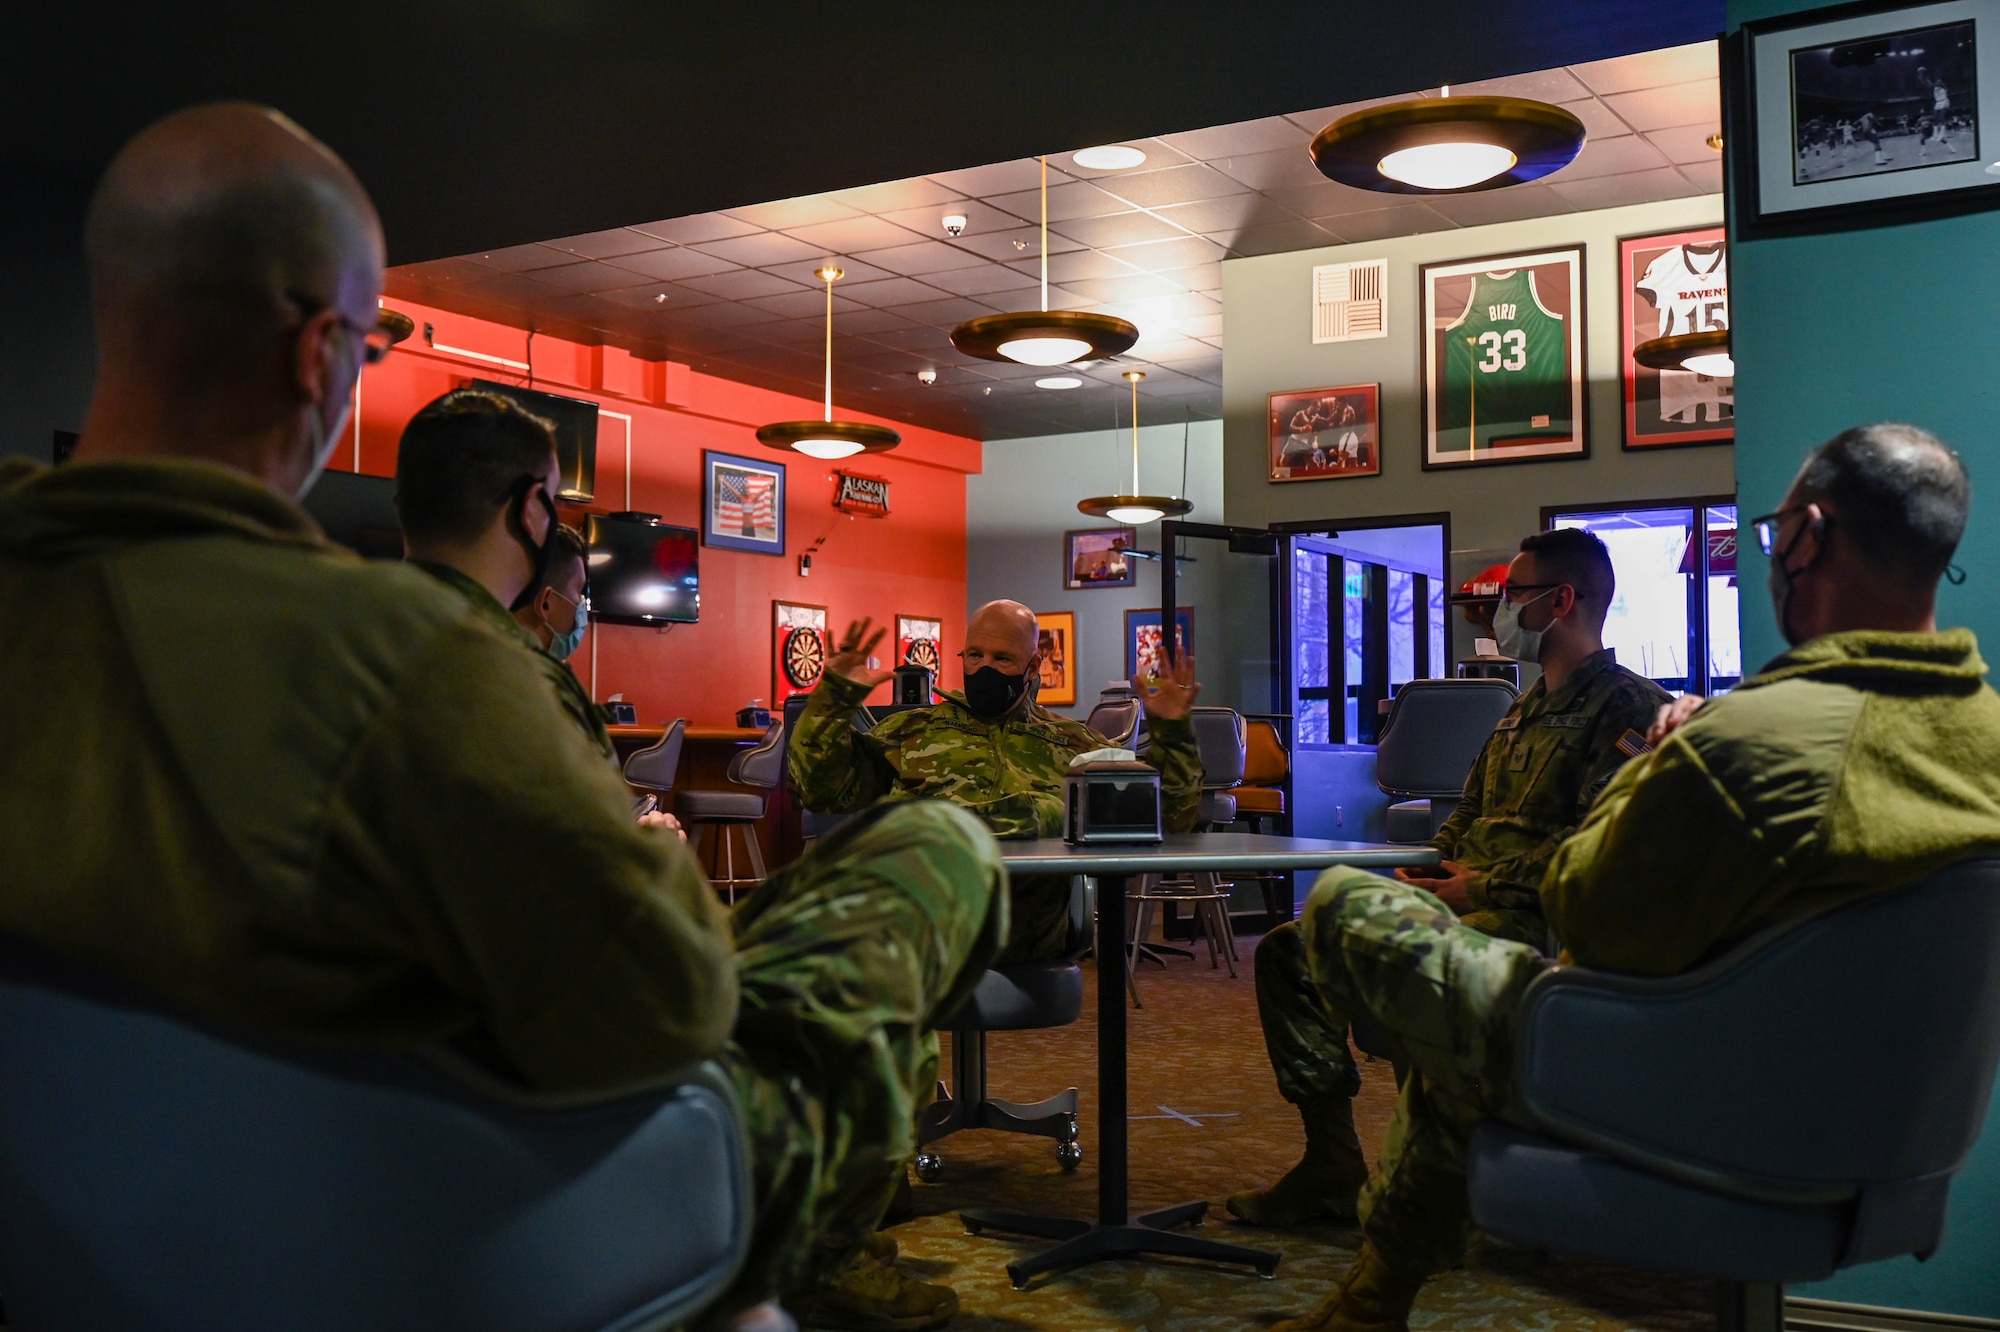 U.S. Space Force Gen. John “Jay” Raymond, Chief of Space Operations, and Chief Master Sgt. of the Space Force Roger Towberman, meet with Guardians assigned to the 354th Fighter Wing, on Eielson Air Force Base, Alaska, March 10, 2021.